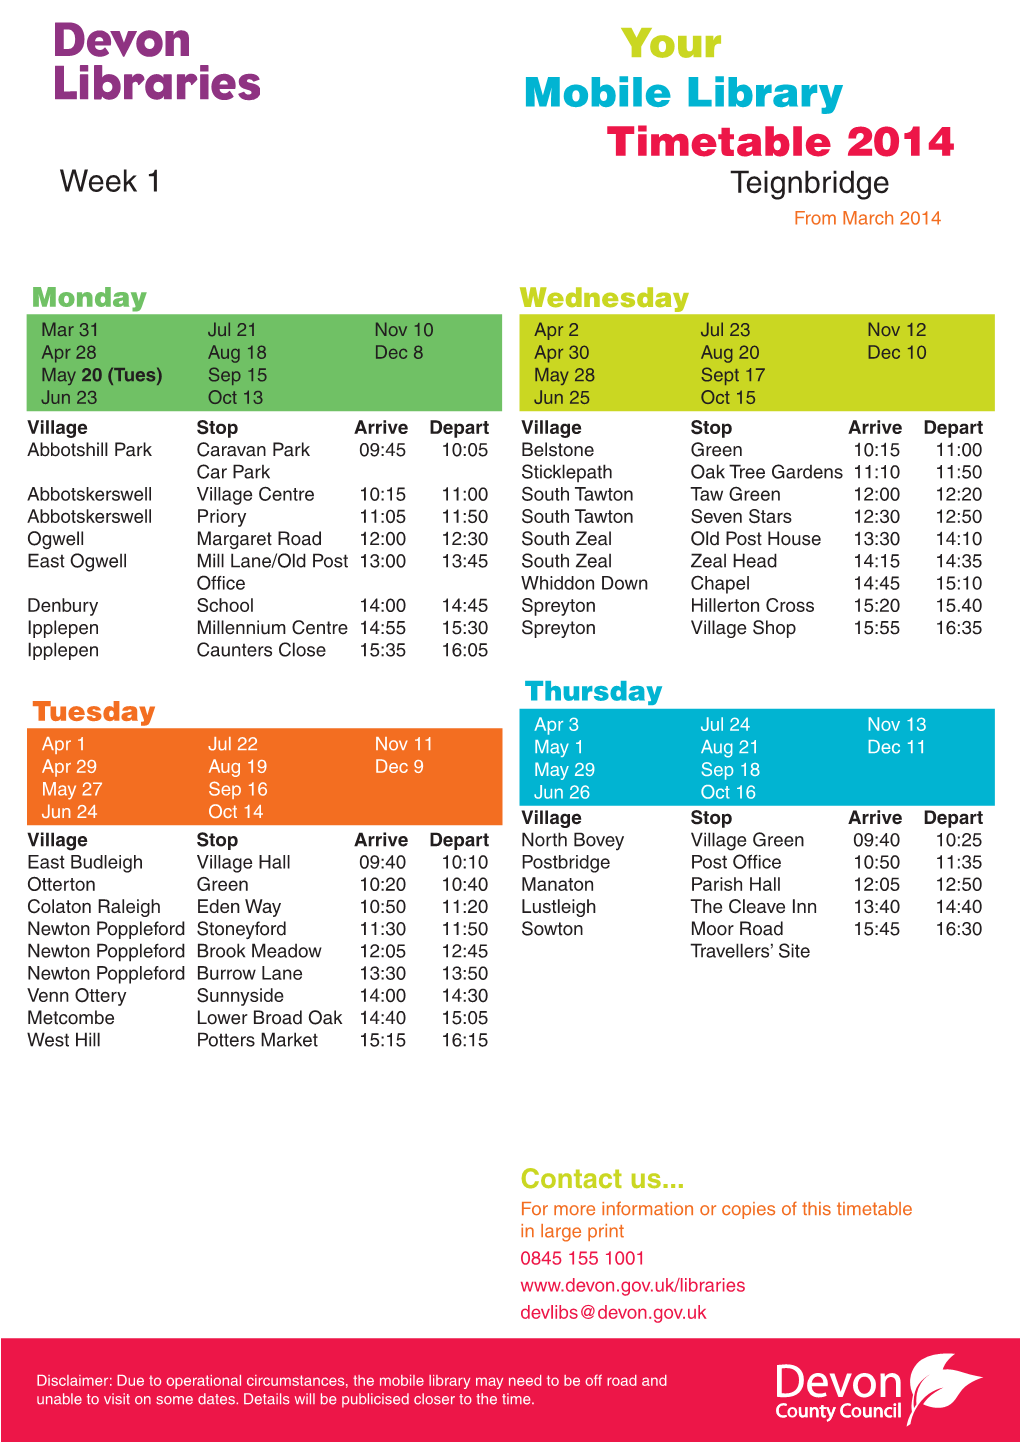 Your Mobile Library Timetable 2014 Week 1 Teignbridge from March 2014